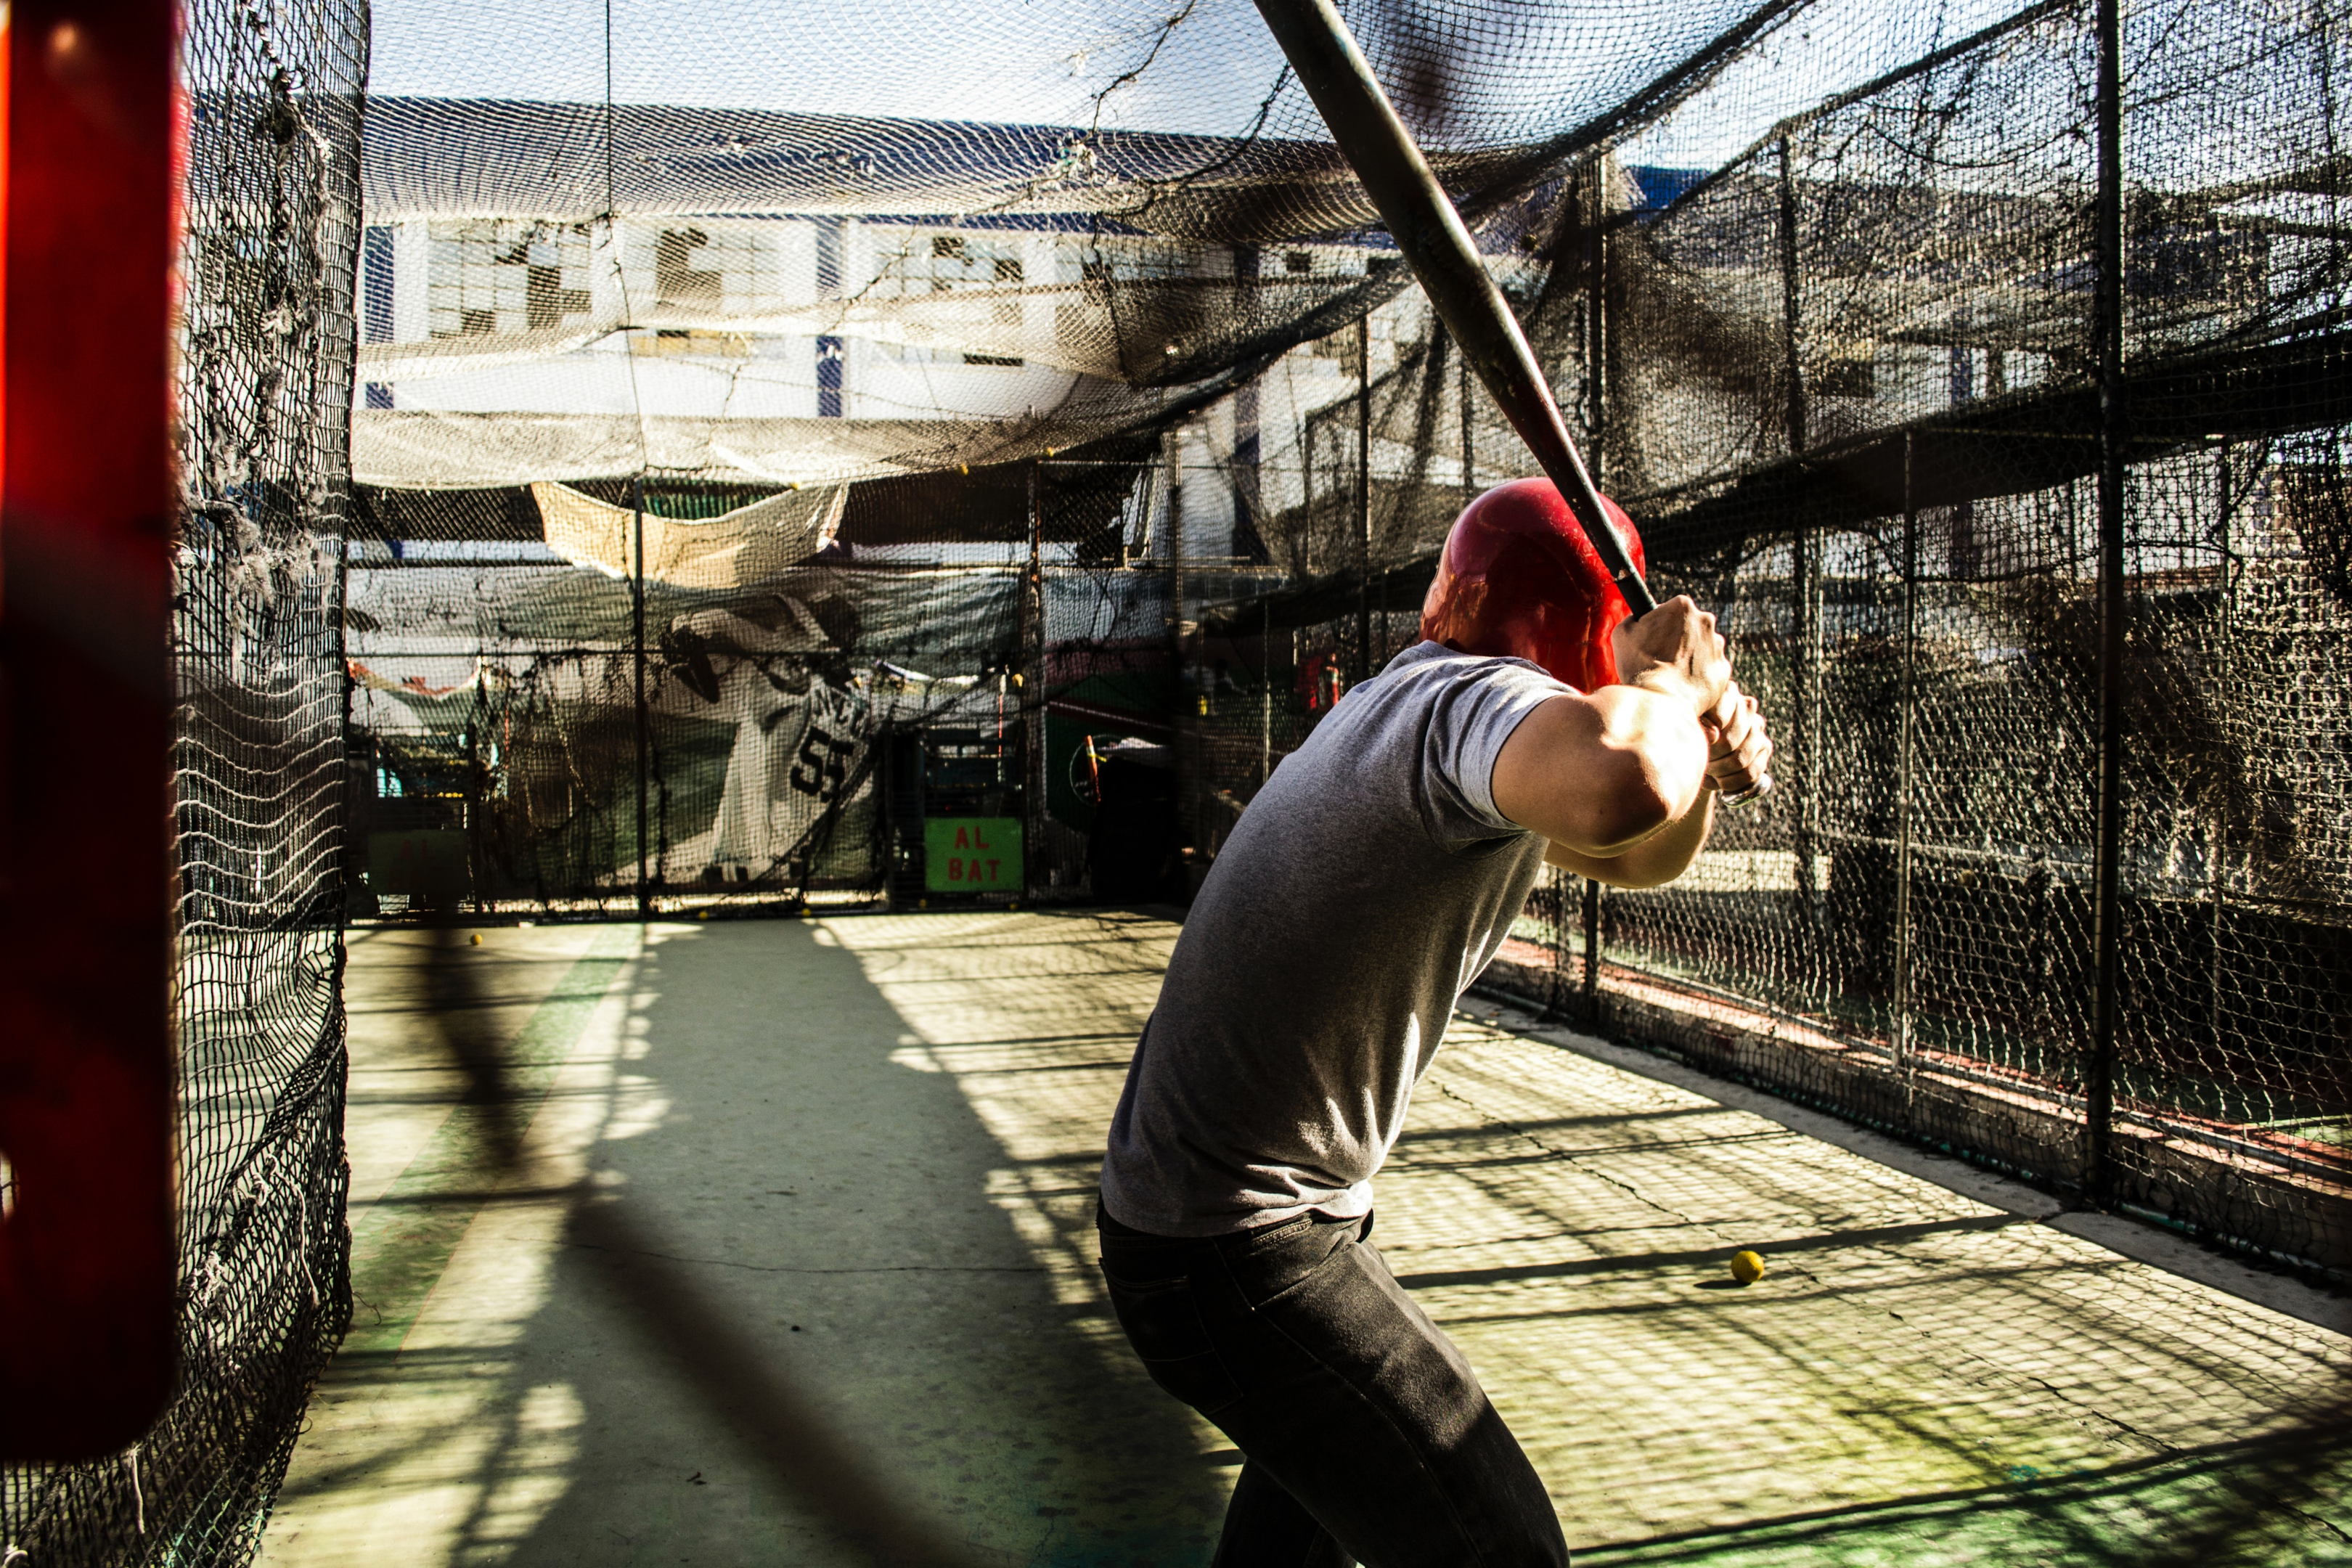 A baseball player in the batting cage with a wood baseball bat in his hands.